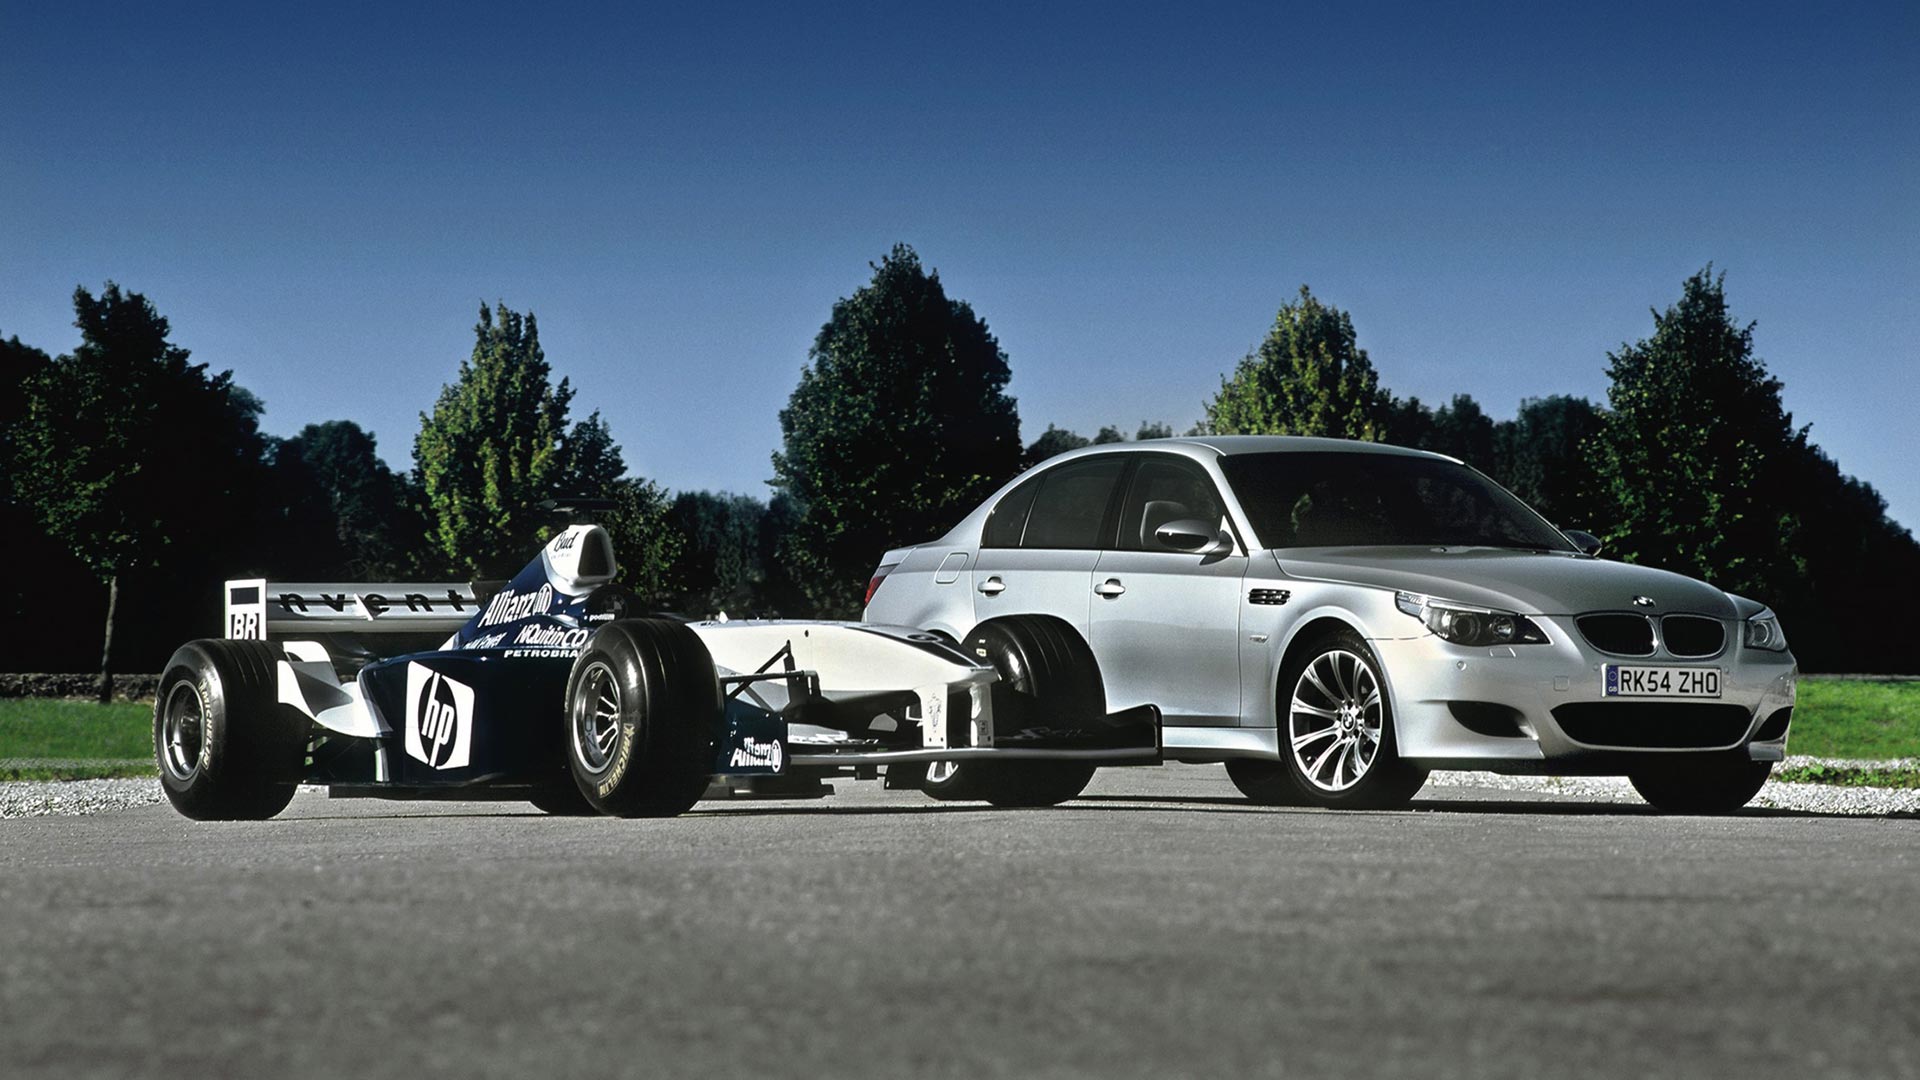 F1 technology for BMW road cars